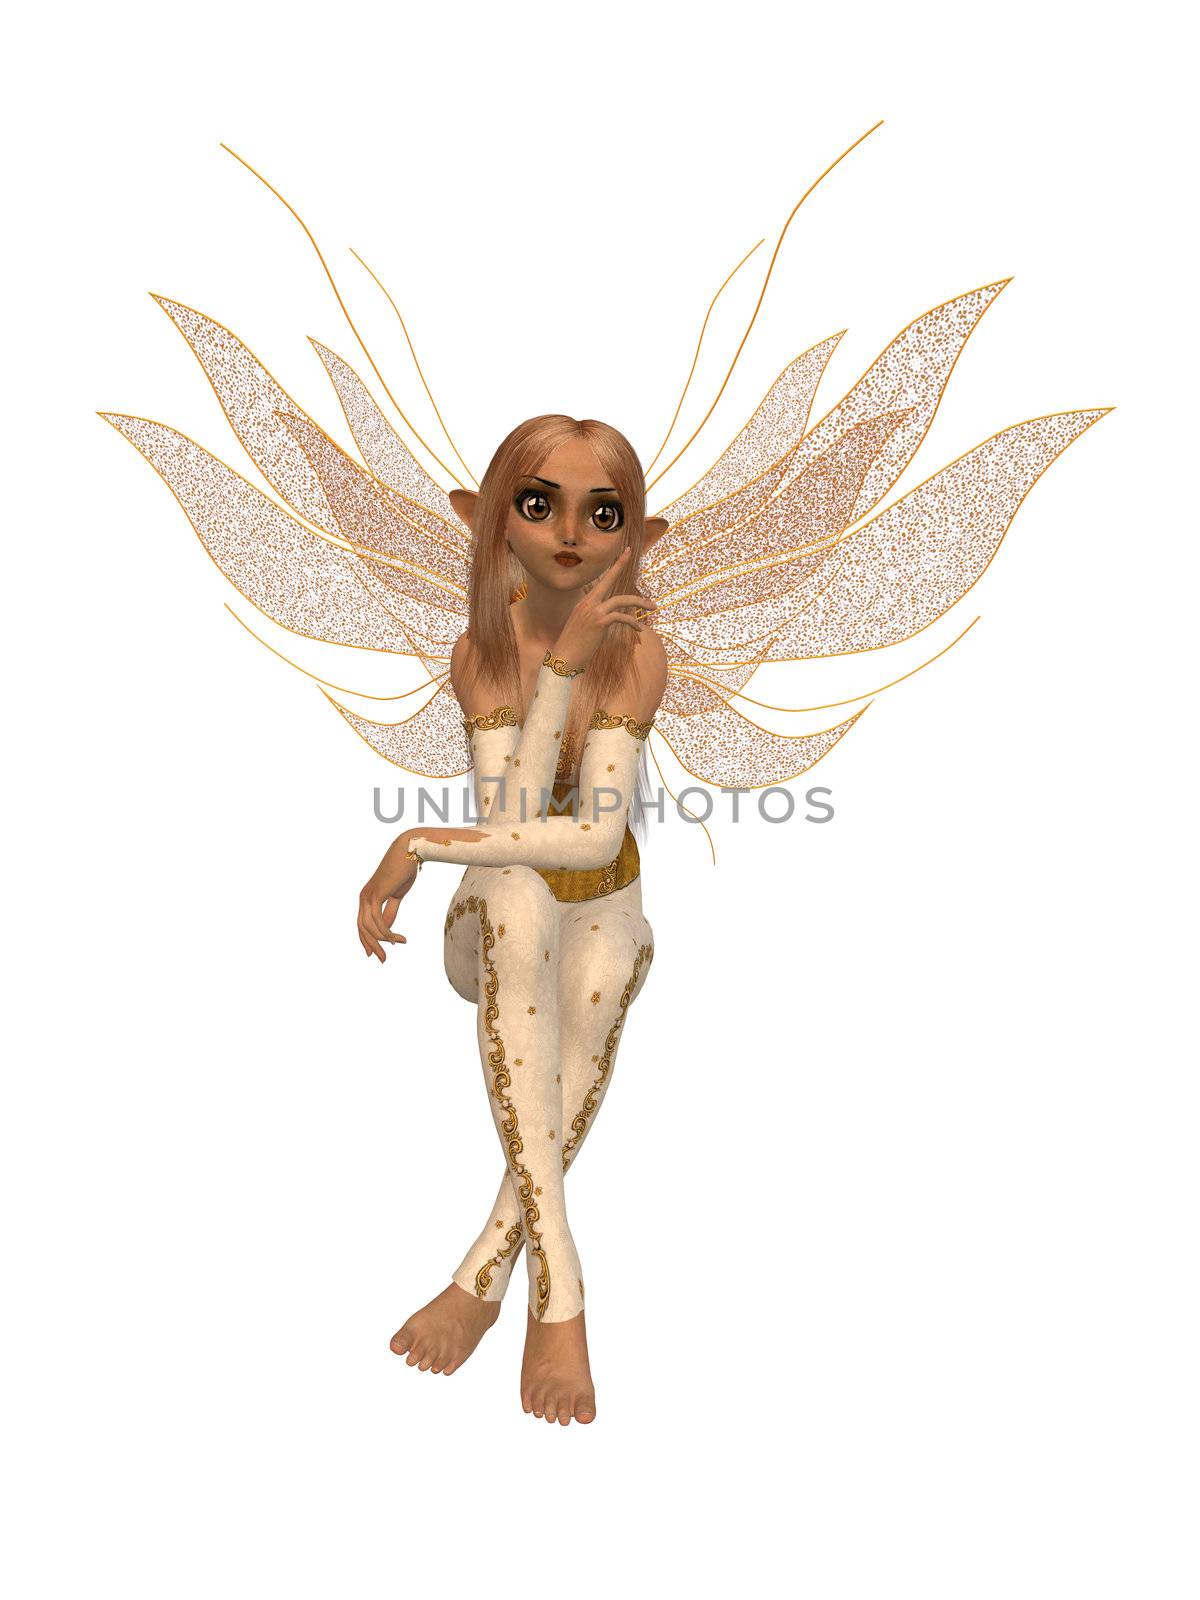 Fairy sitting down and thinking with wings spread